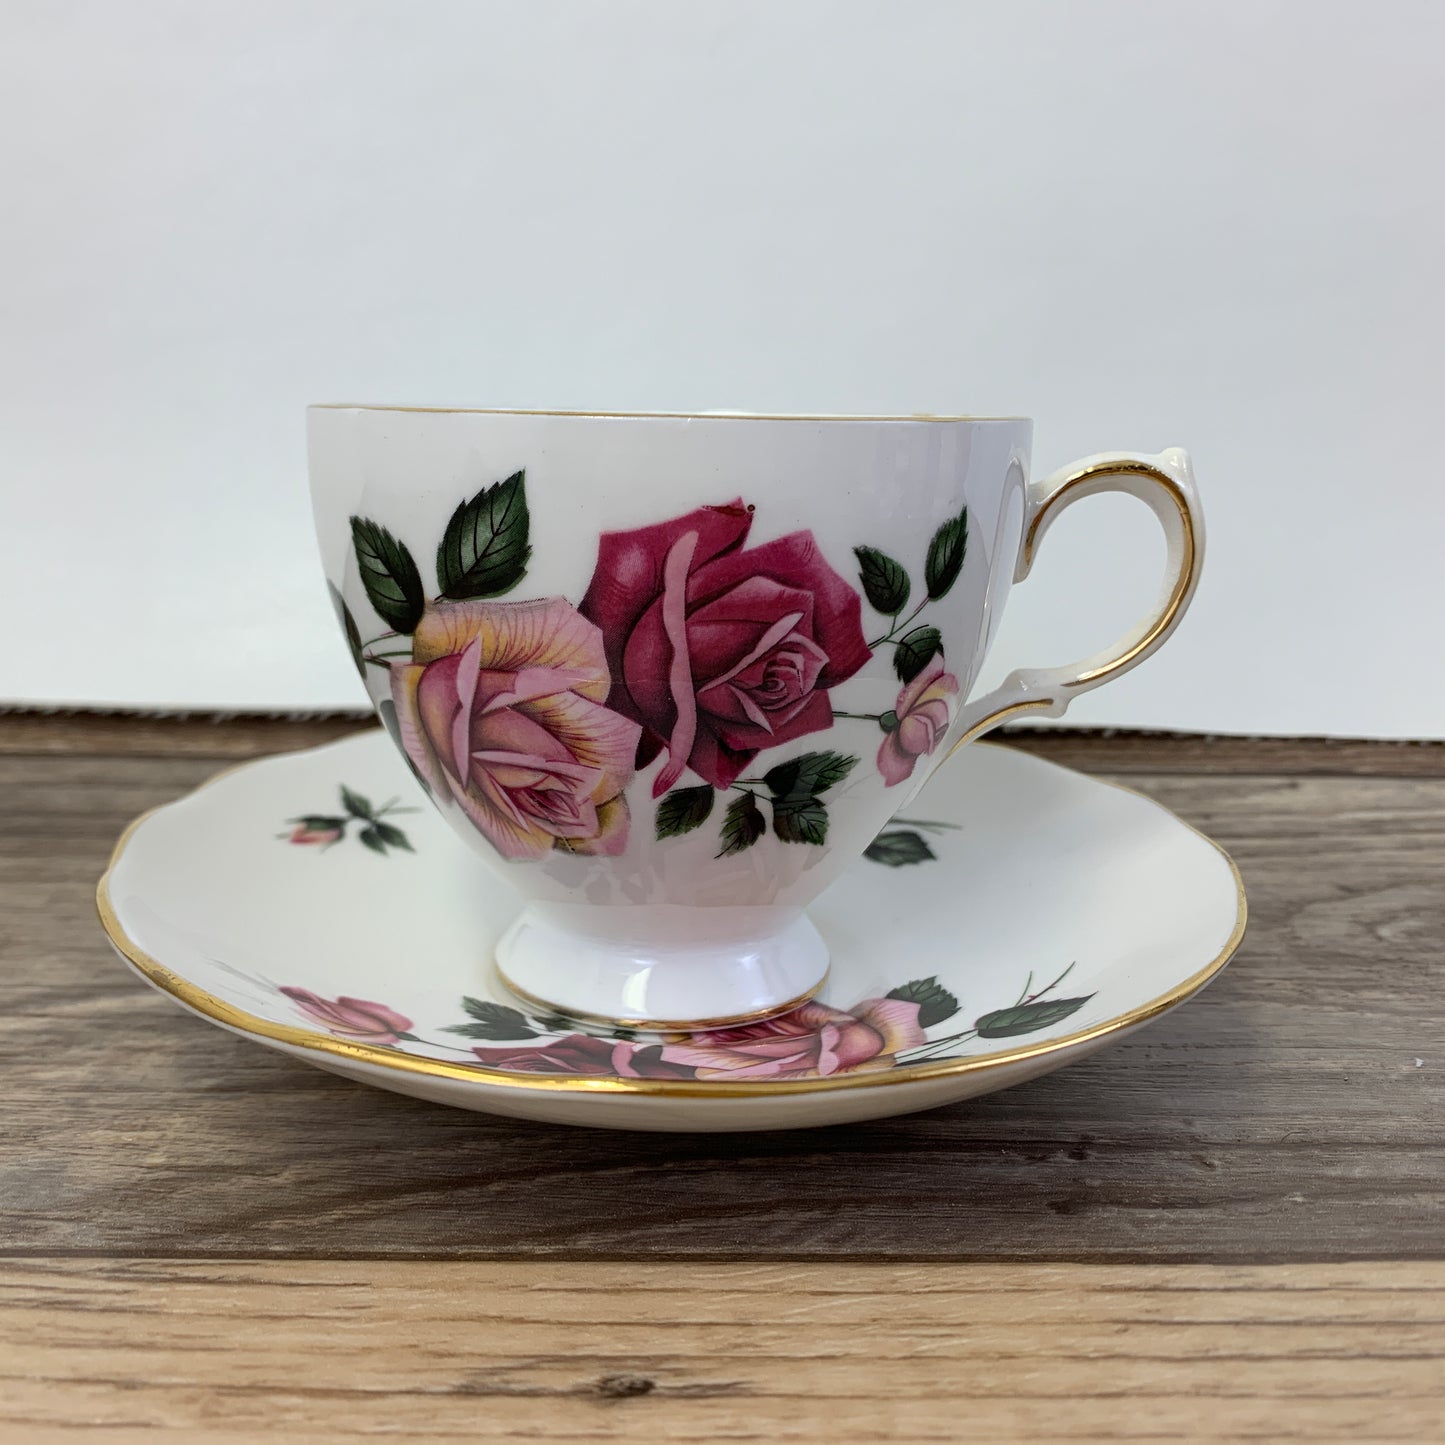 Vintage Floral Teacup with Pink and Red Roses Royal Vale English Teacup